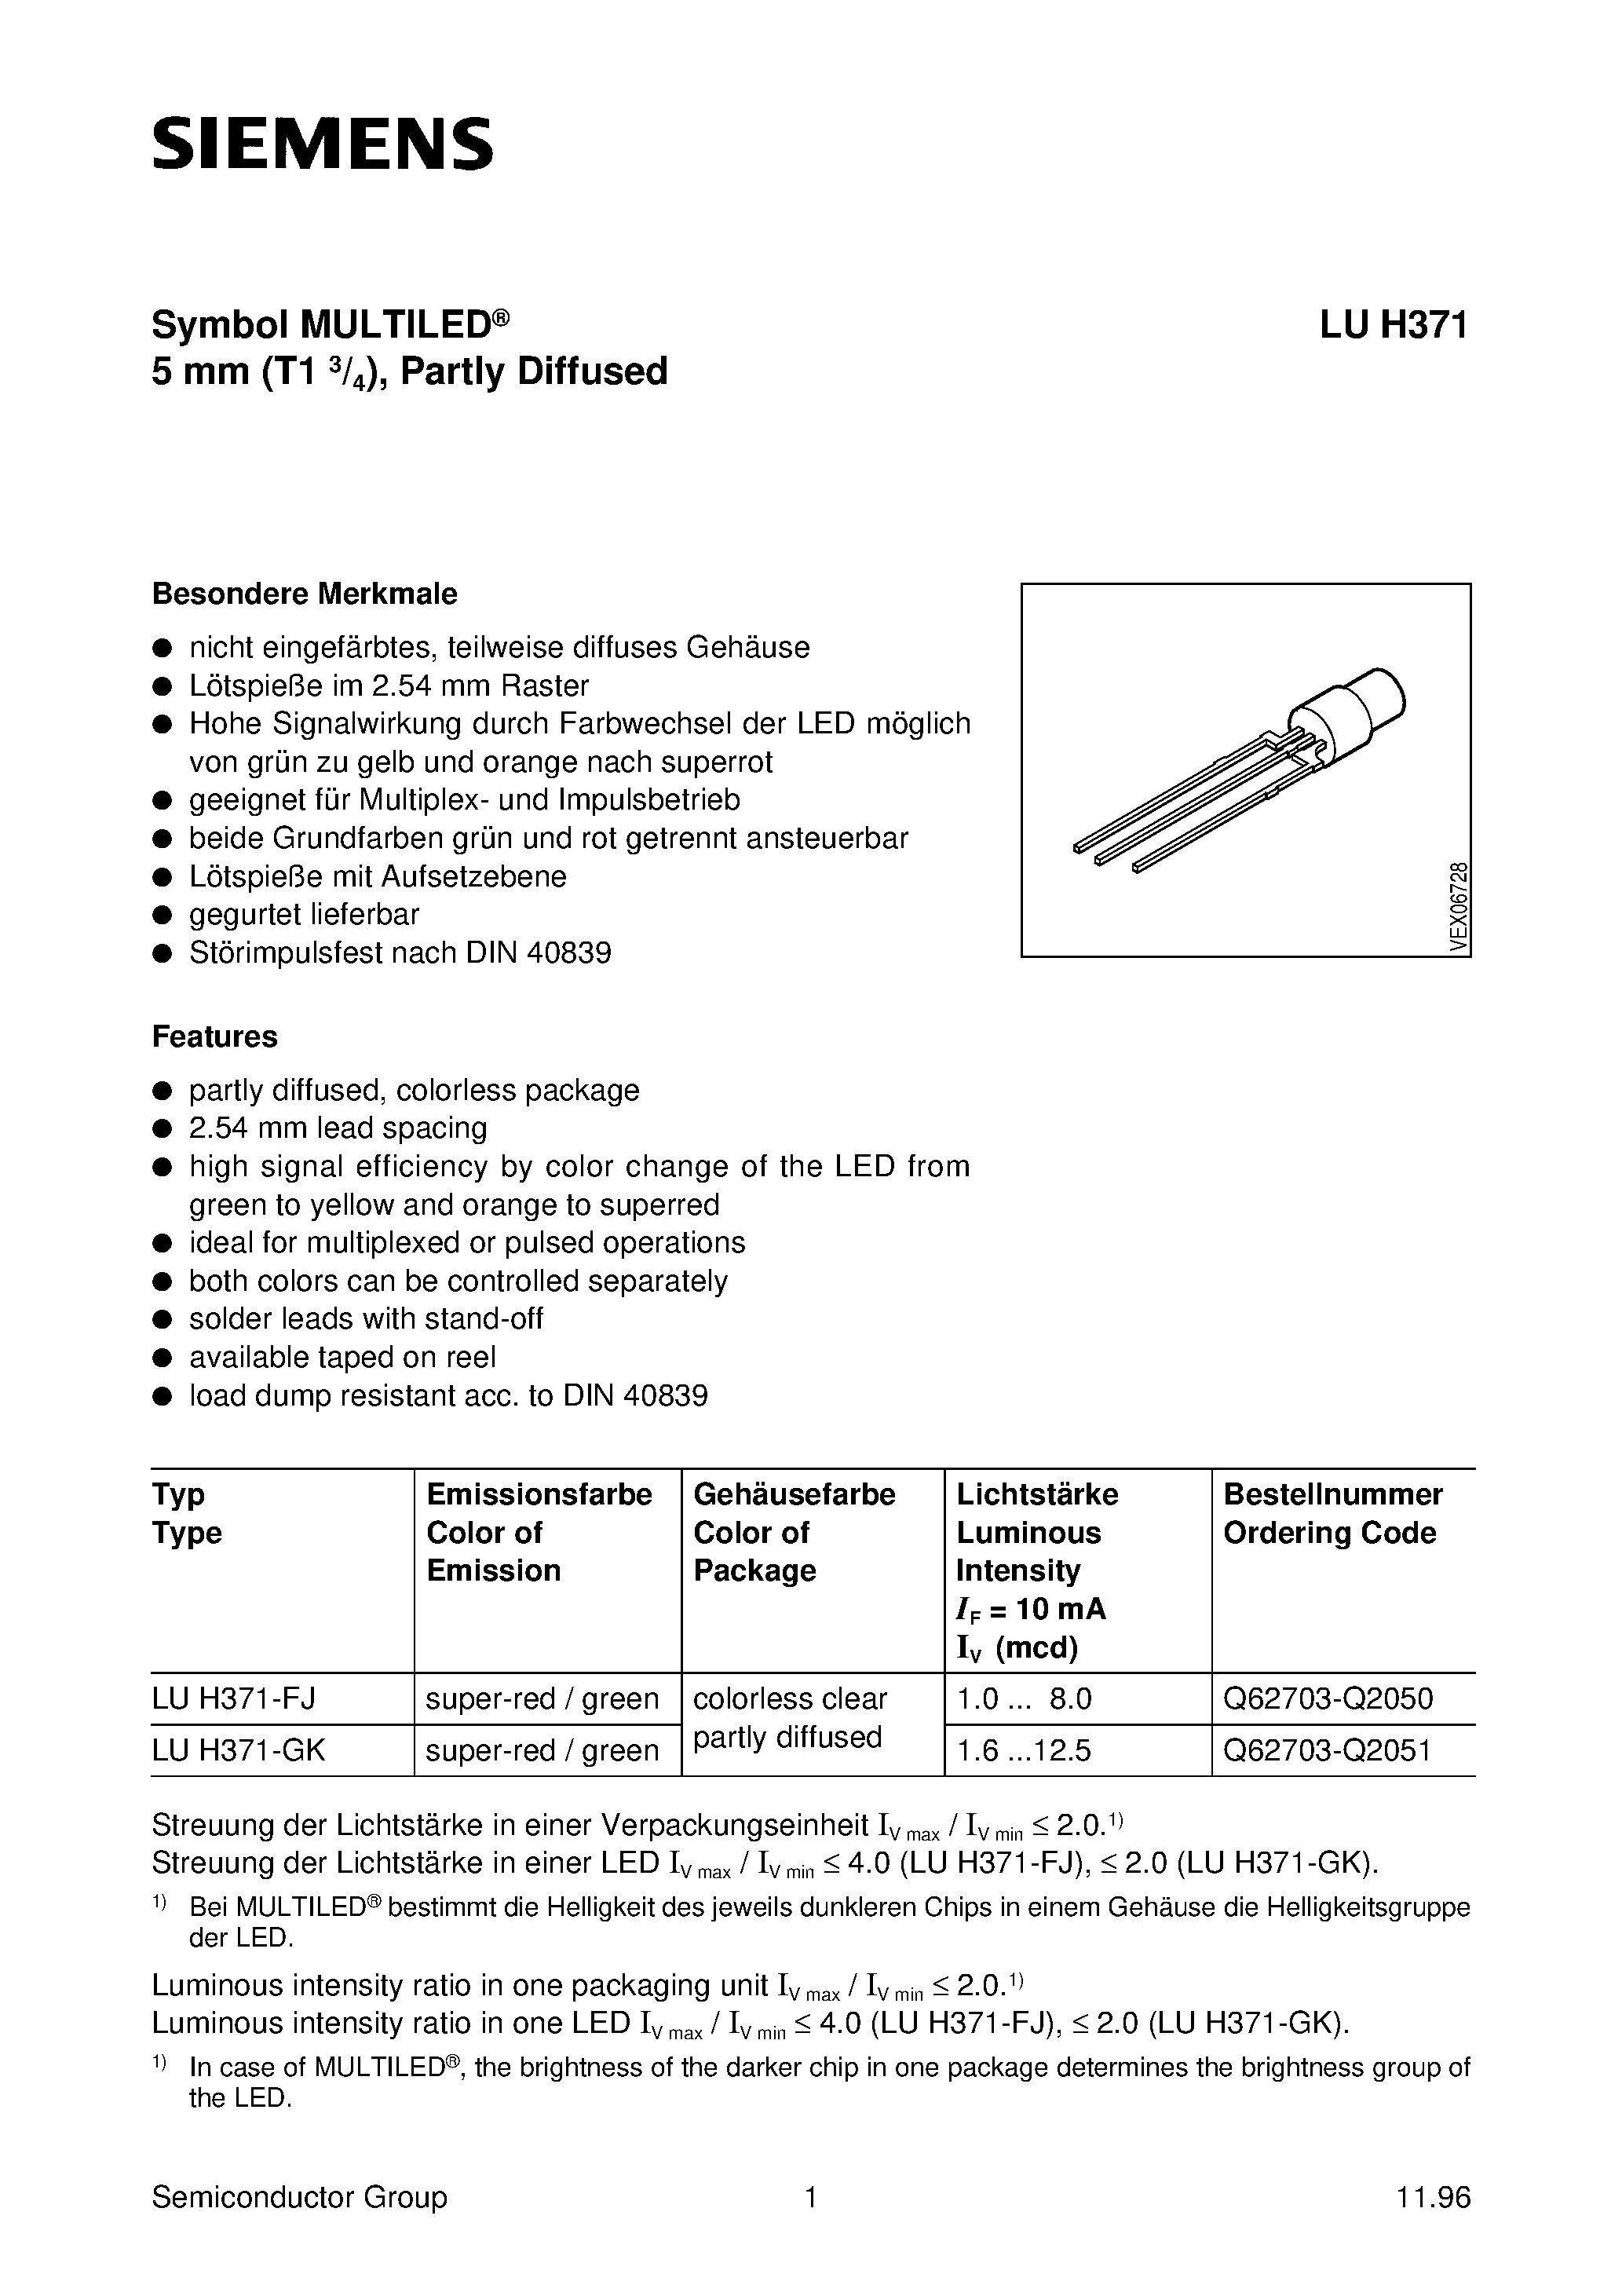 Datasheet LUH371-FJ - Symbol MULTILED 5 mm T1 3/4/ Partly Diffused page 1